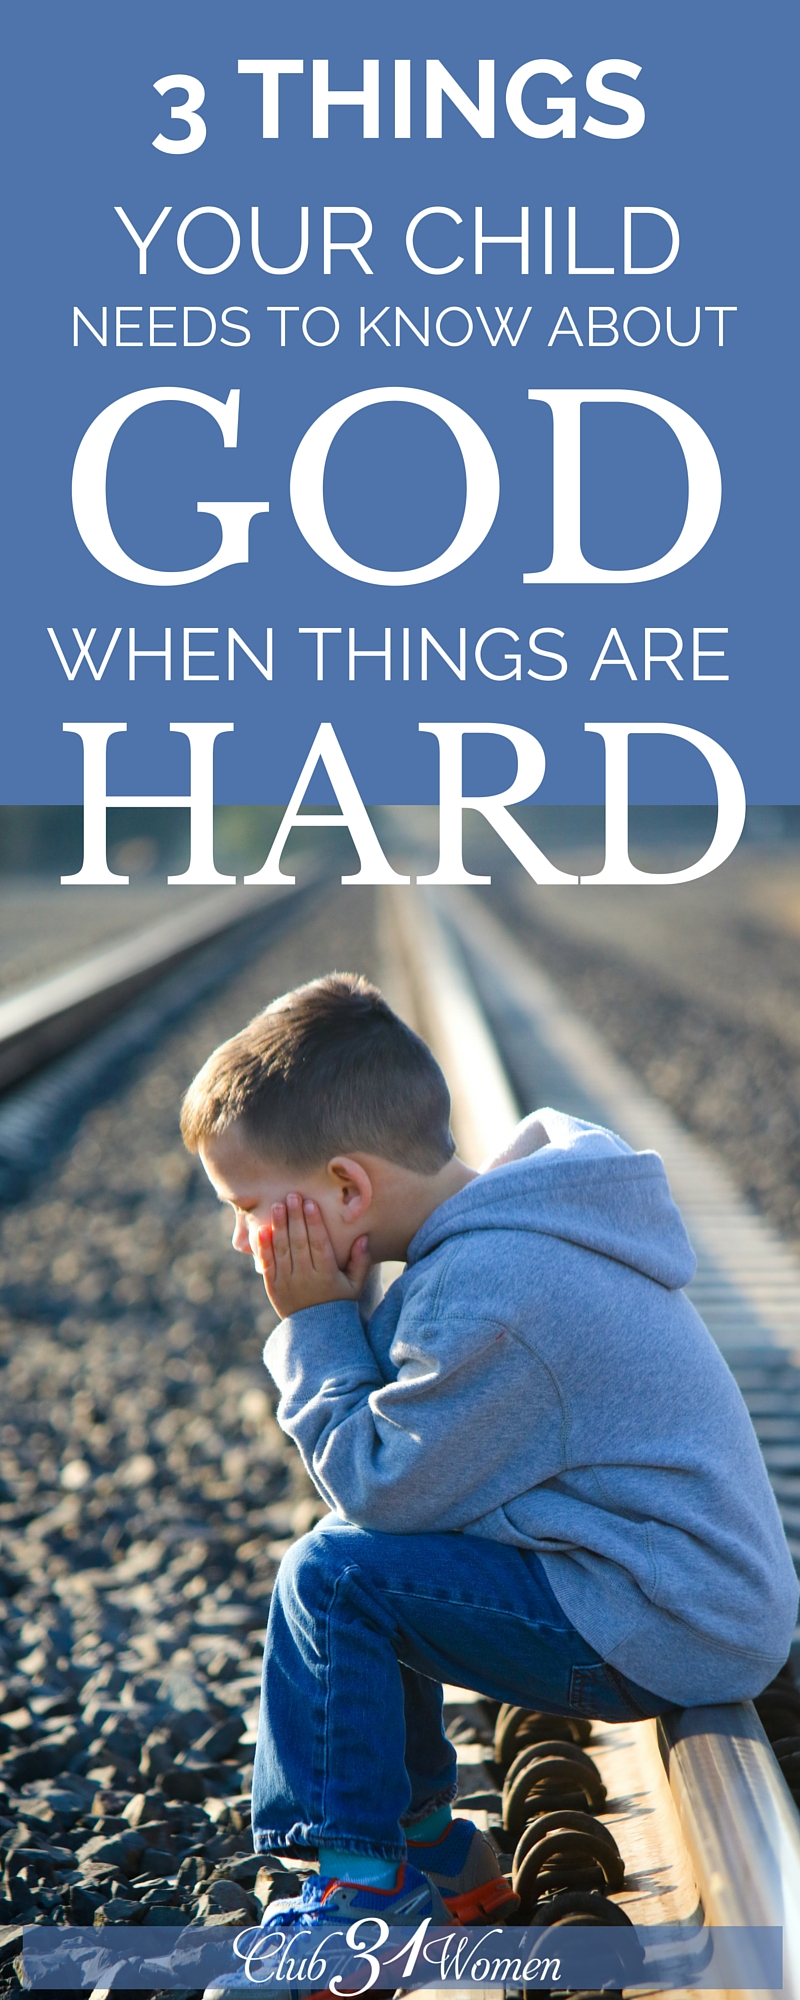 3 Things Your Child Needs to Know About God During Hard Times via @Club31Women